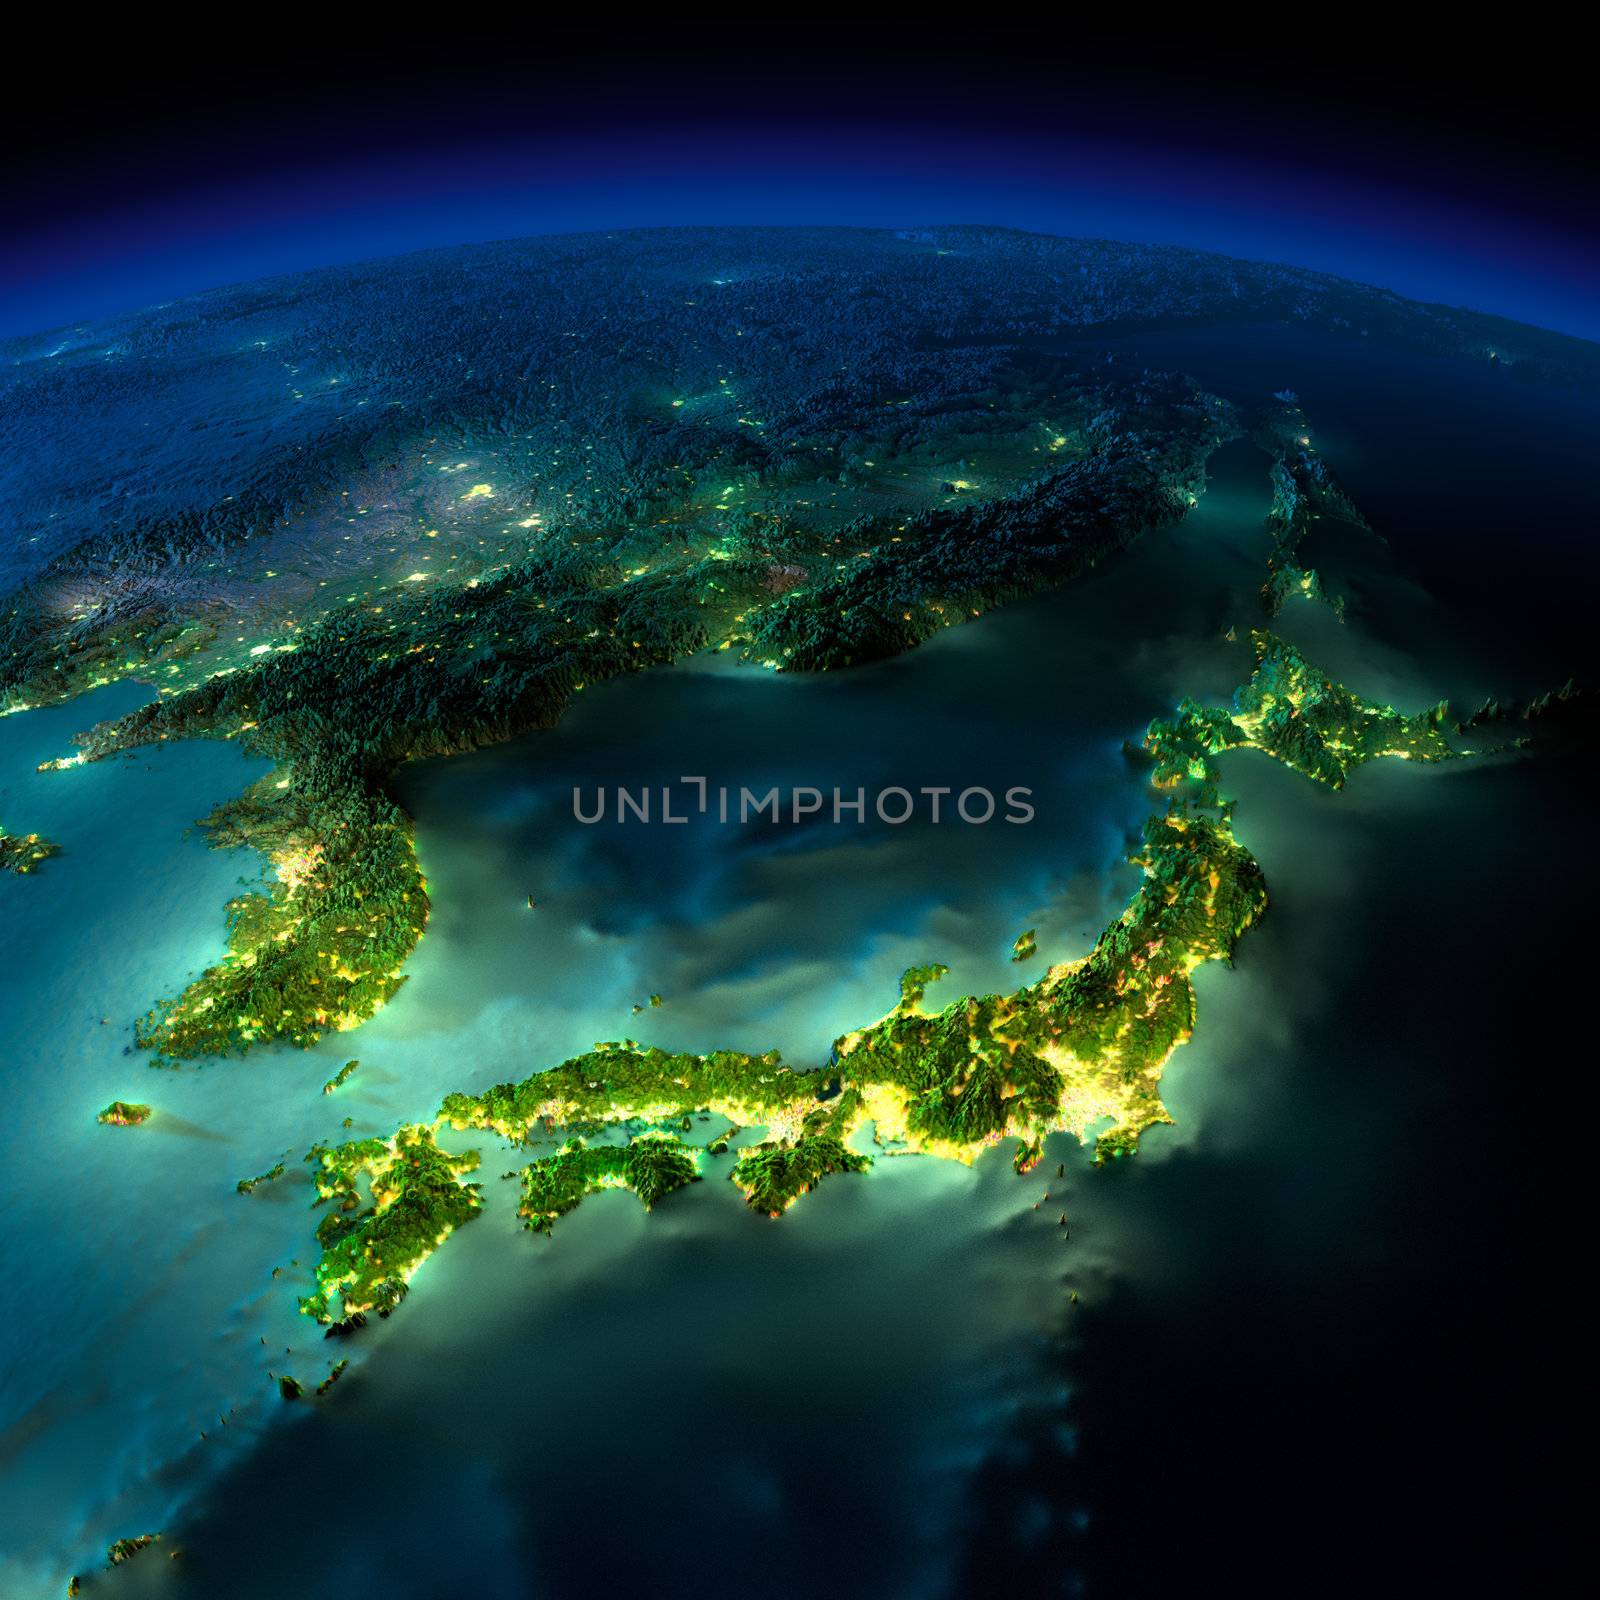 Night Earth. A piece of Asia - Japan, Korea, China by Antartis